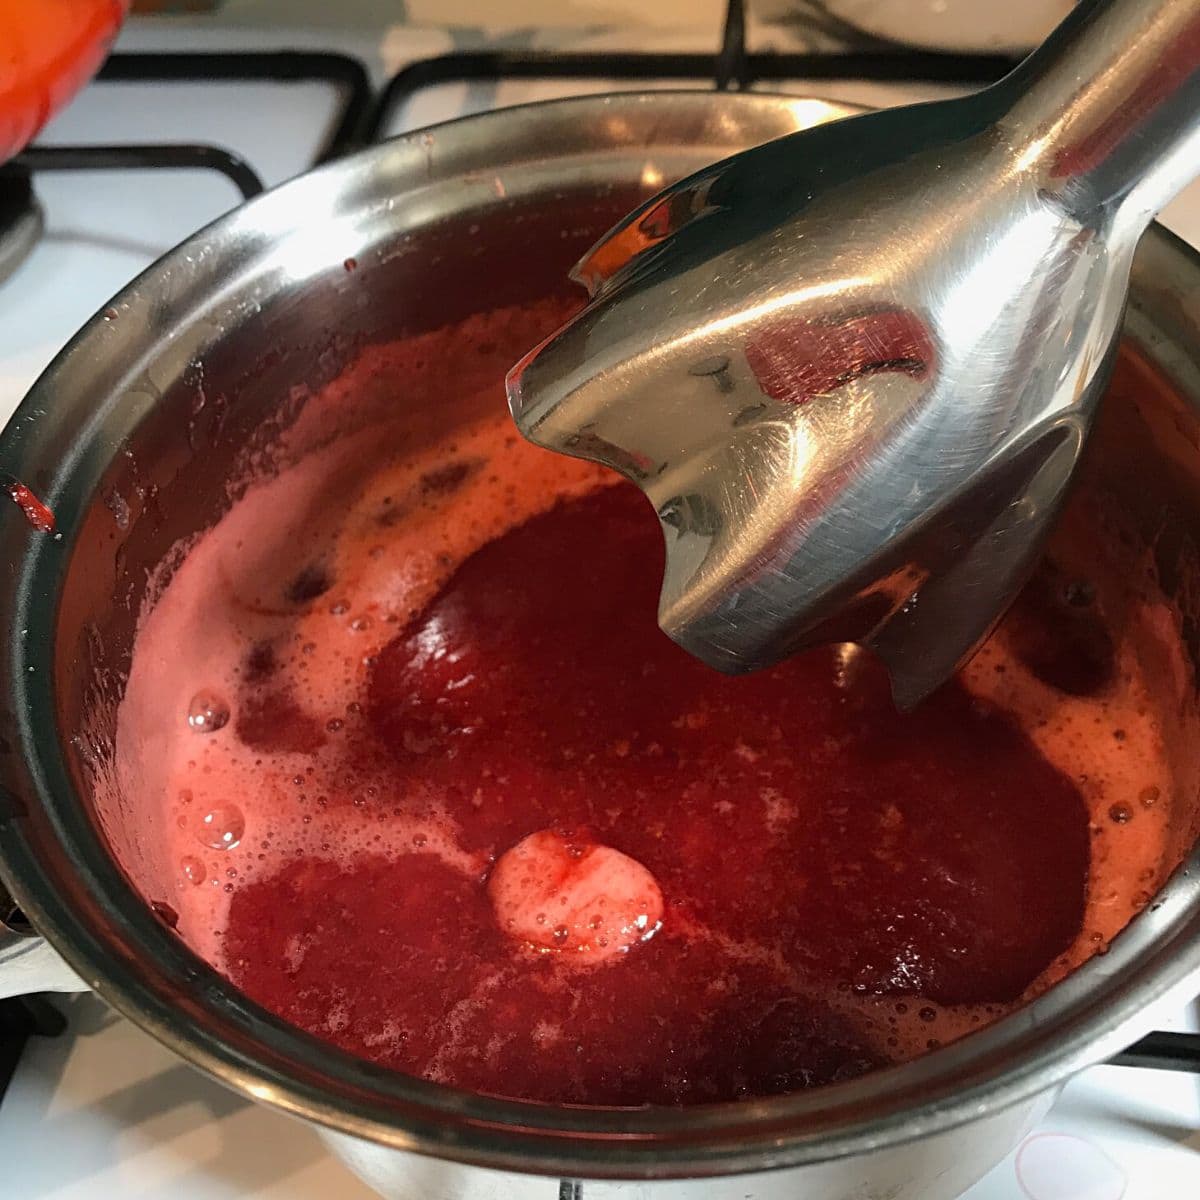 Using hand blender to blend the strawberries in small pan.